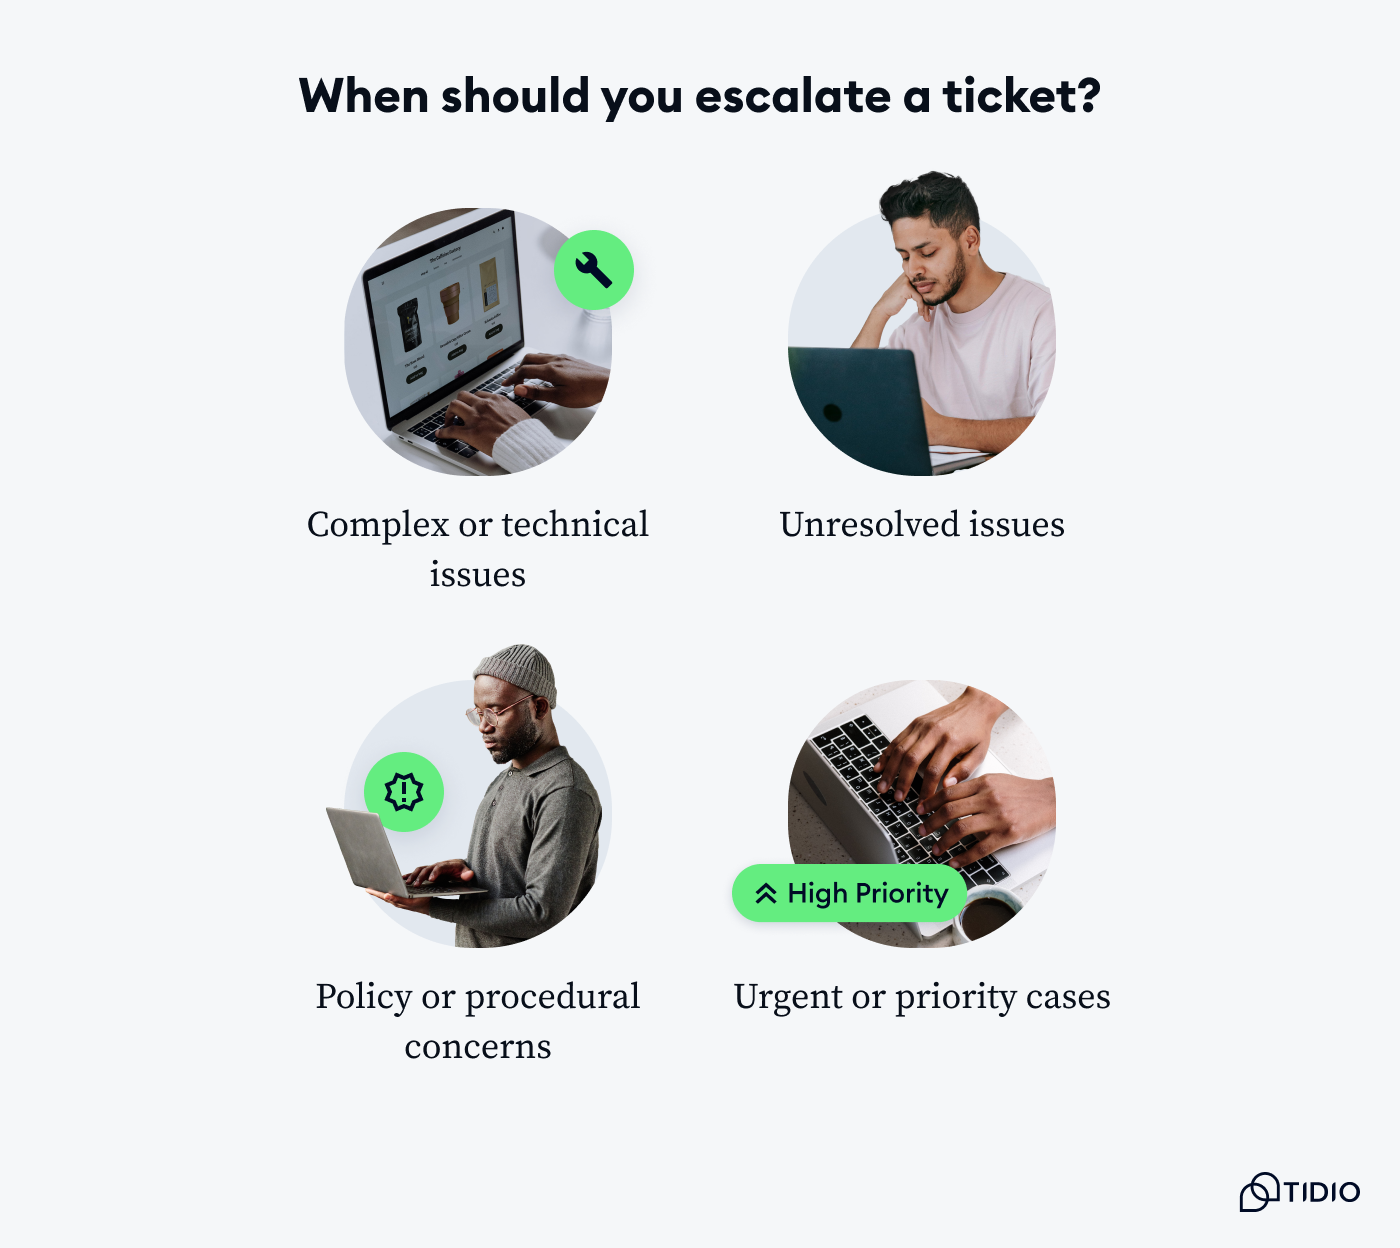 When should you escalate a ticket on image